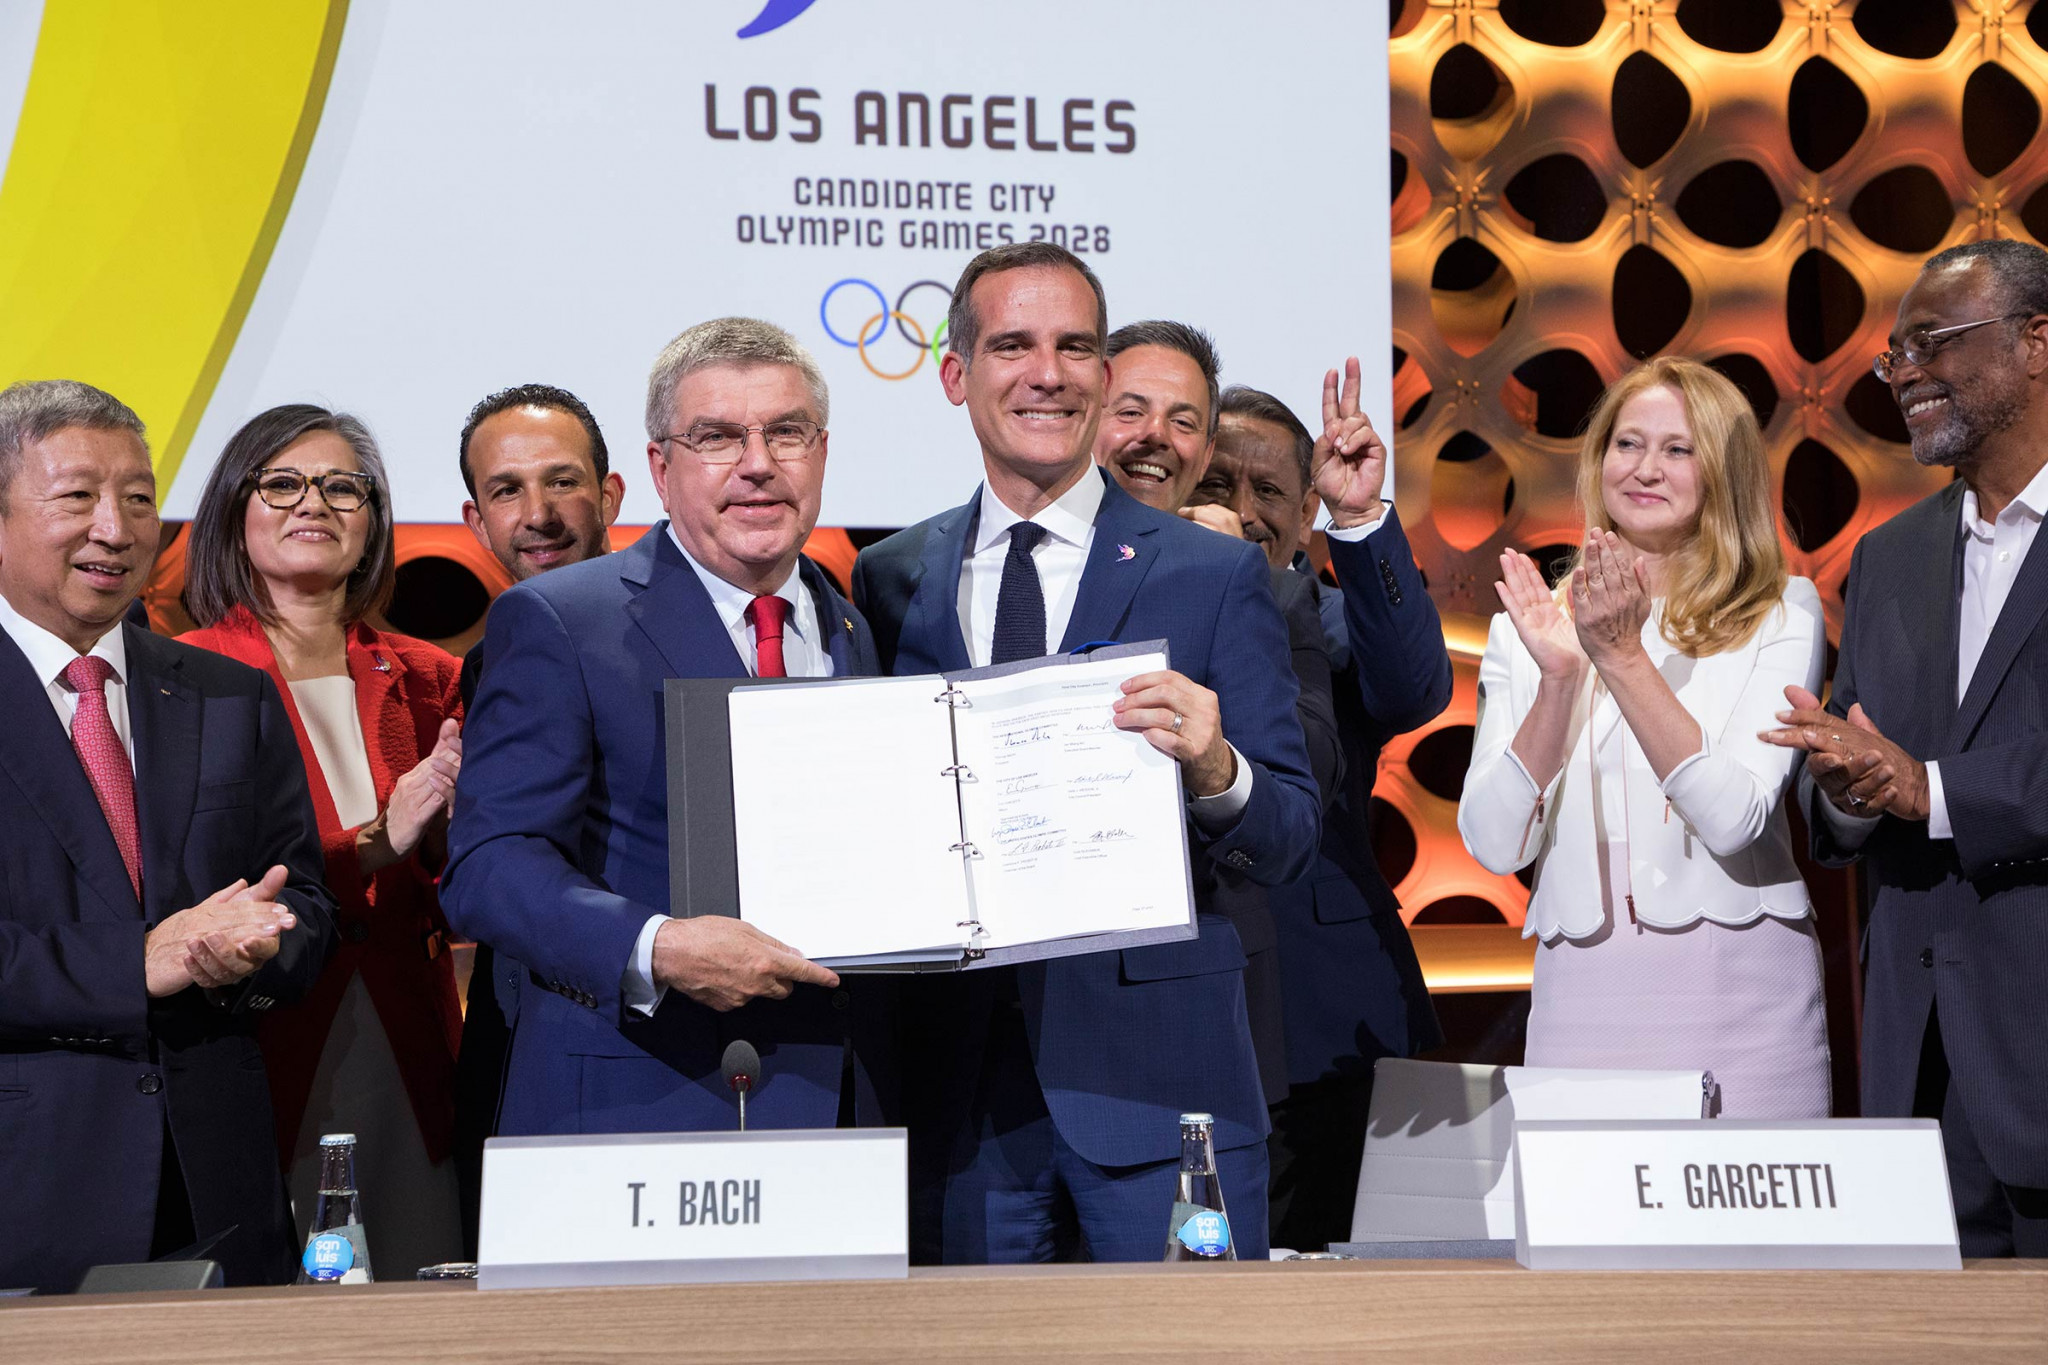 Labour union files lawsuit seeking disclosure of Games Agreement for Los Angeles 2028